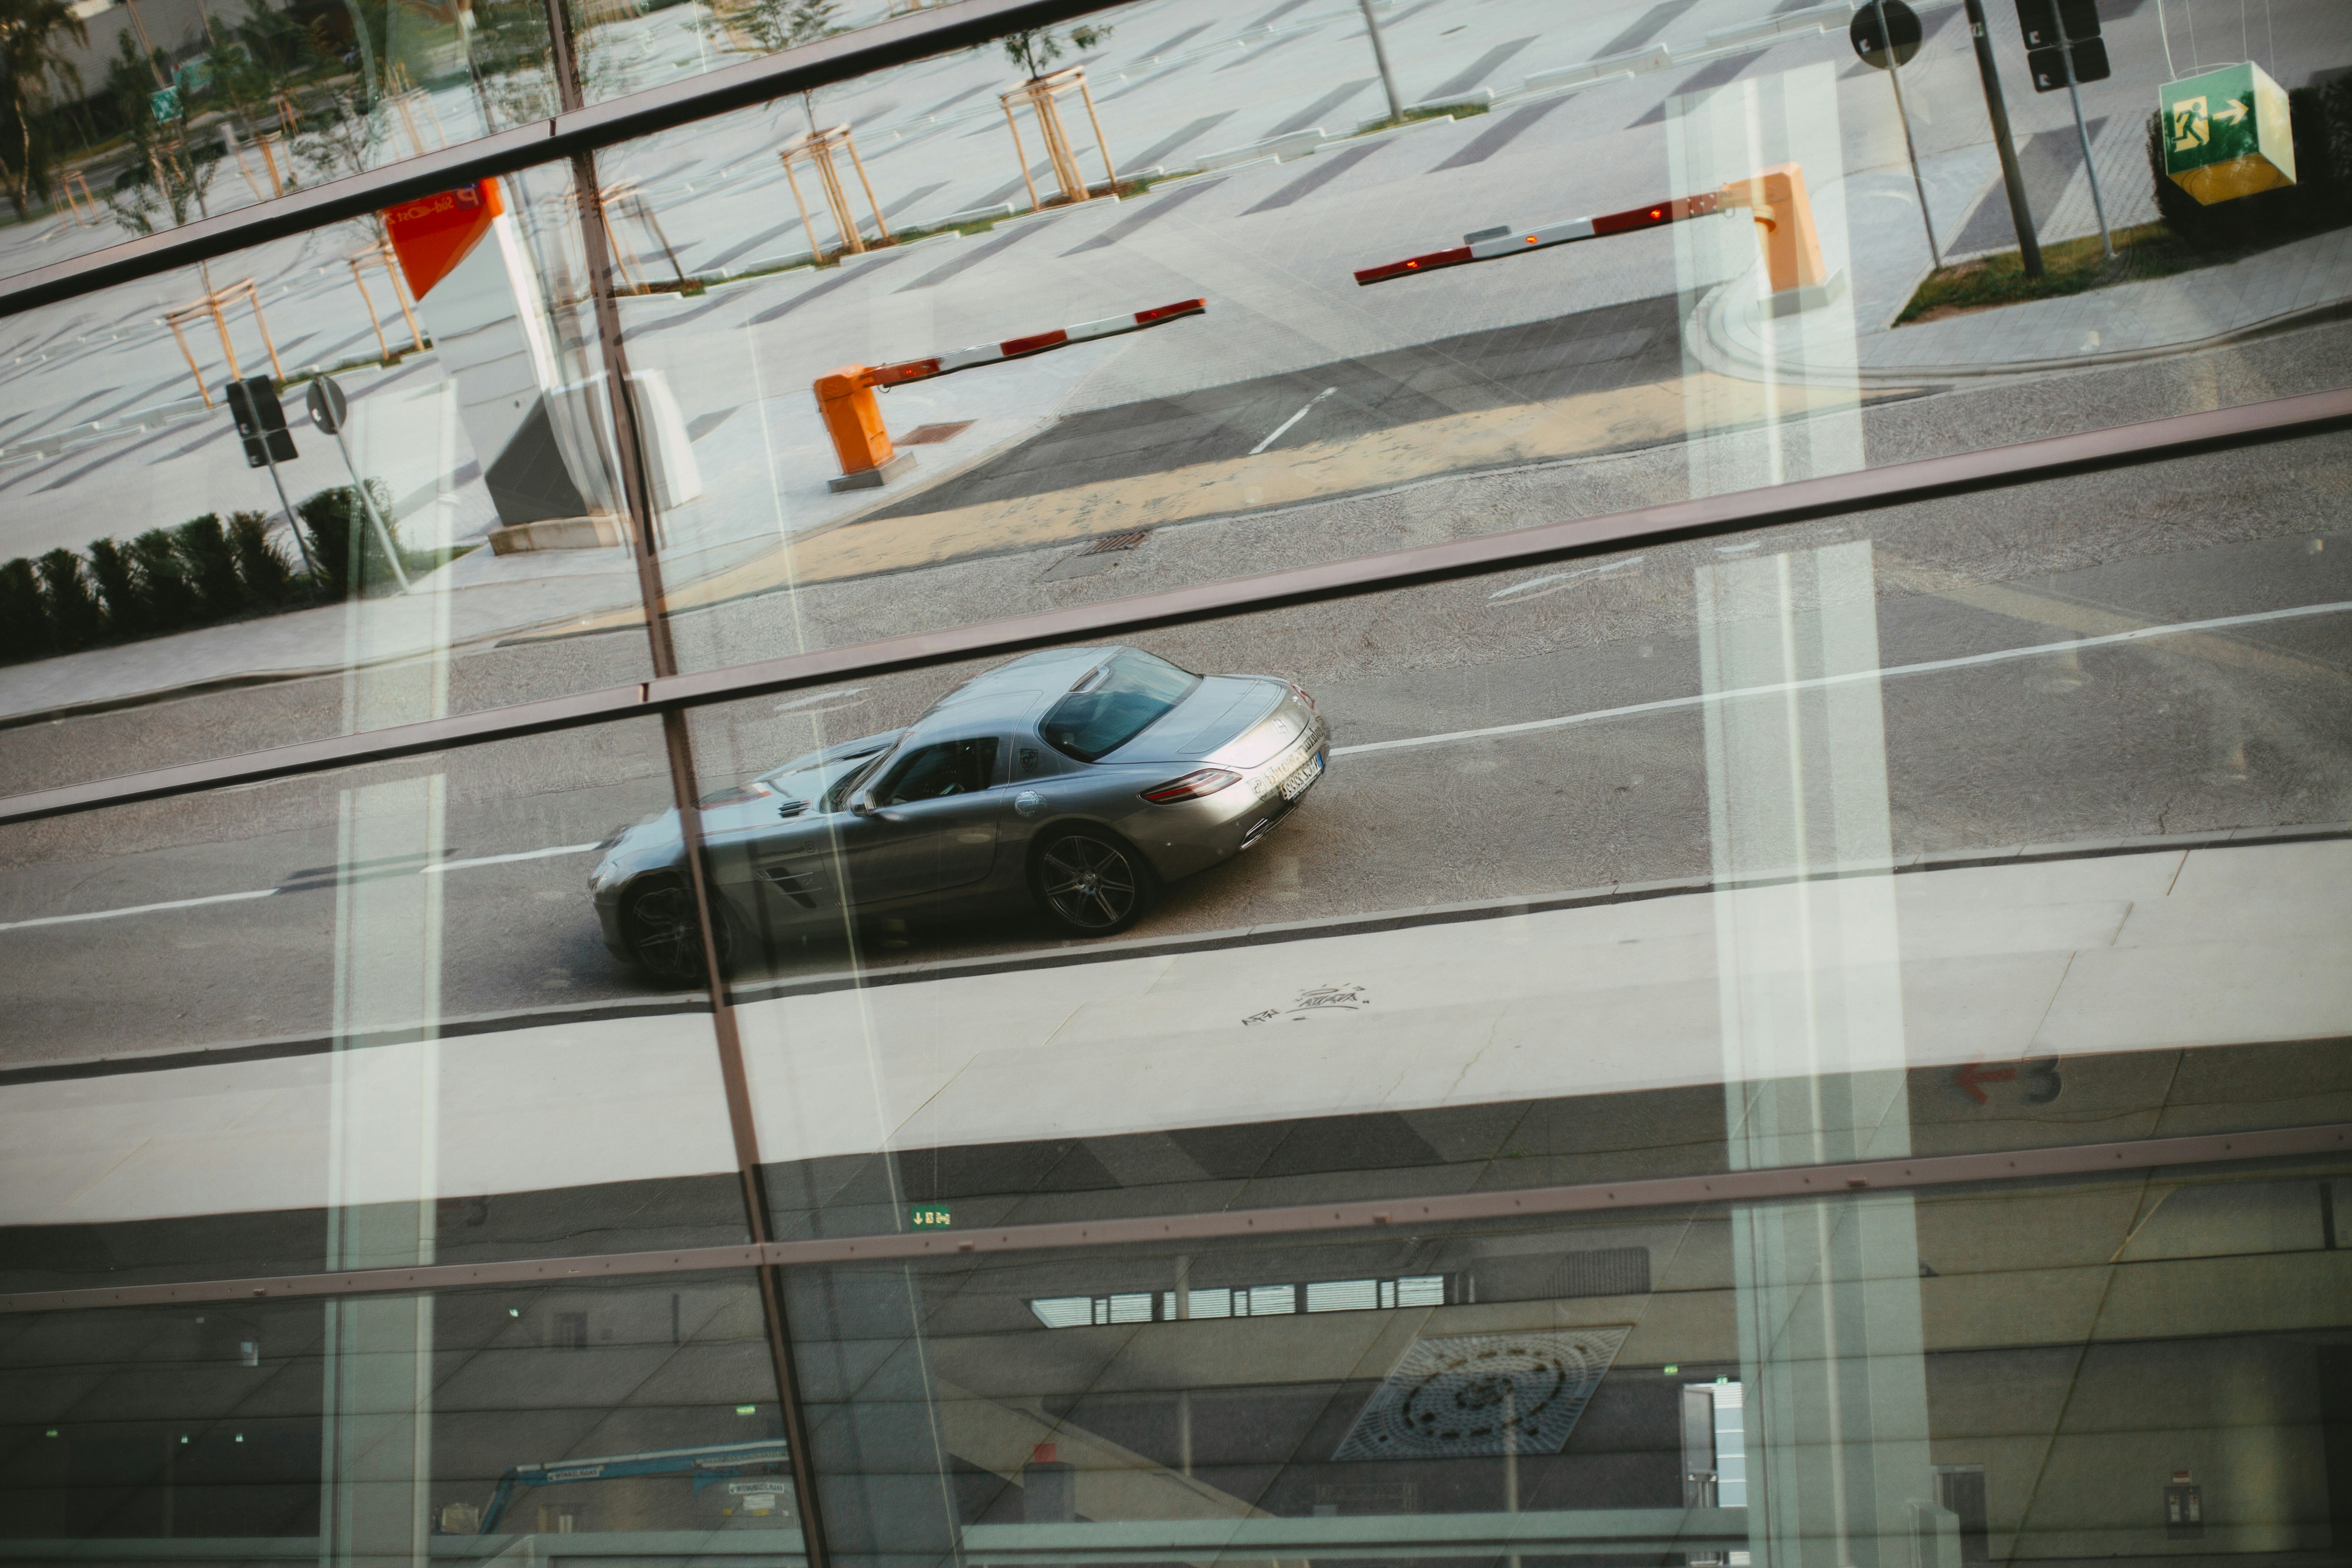 Glass reflection - Mercedes-Benz SLS AMG - Luxury Sports Car Gran-Turismo-Coupé. Made with analog vintage lens, Leica Summilux-R 1.4 50mm (Year: 1983)